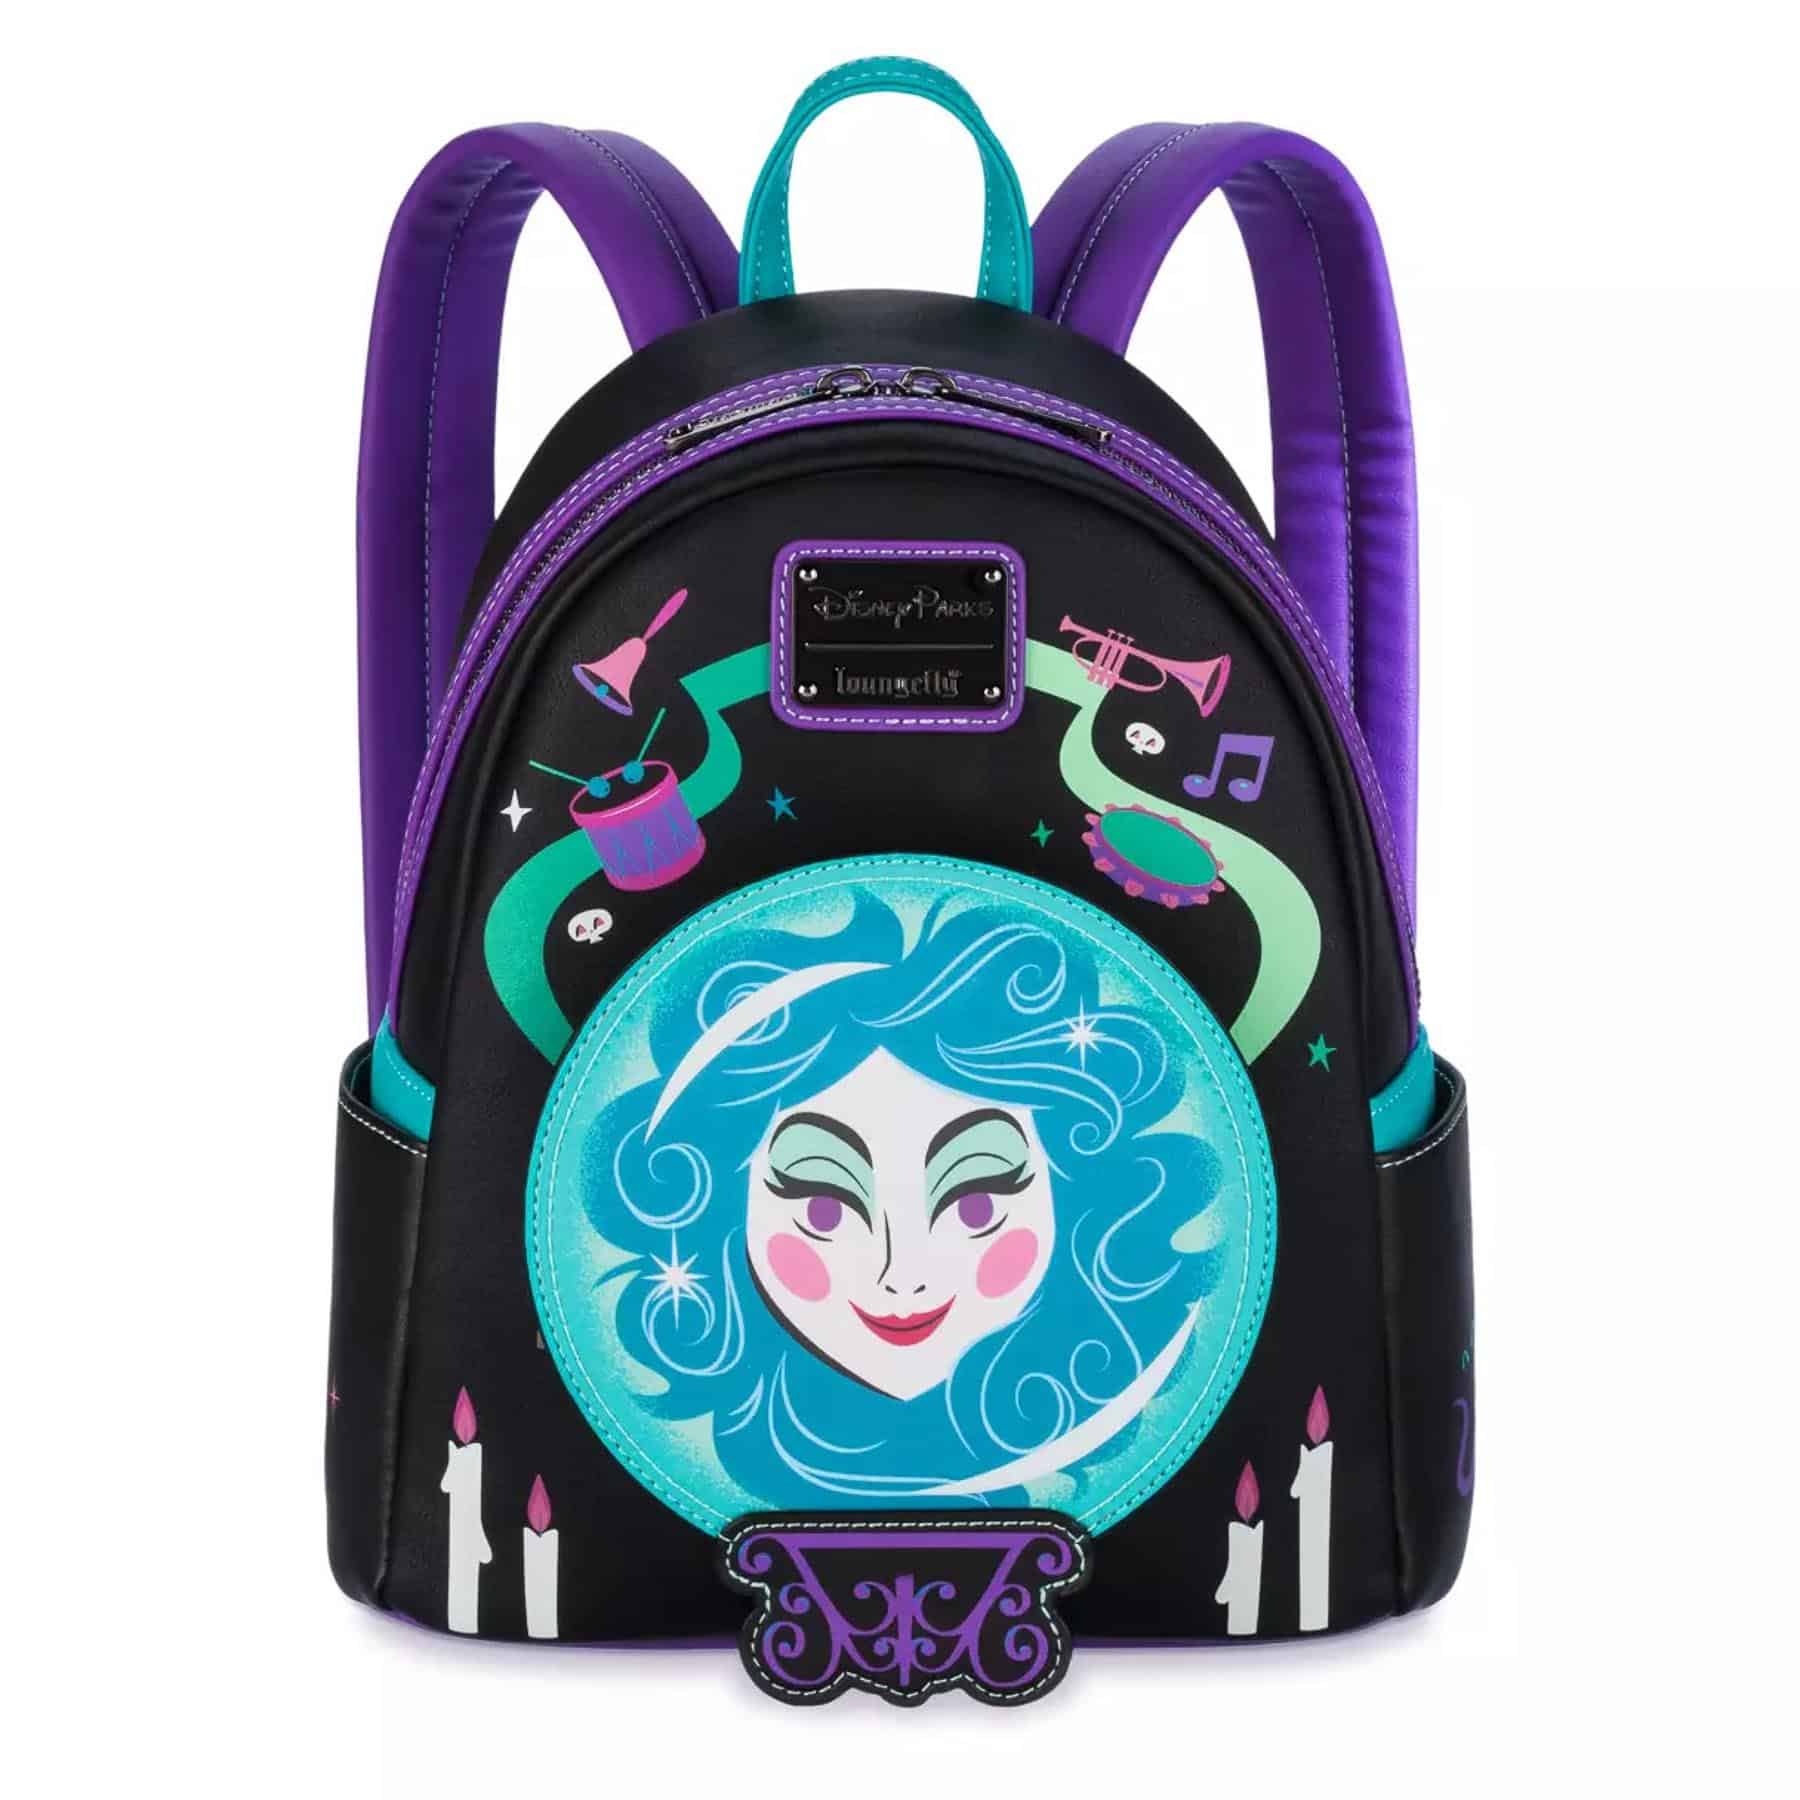 Haunted Mansion backpack